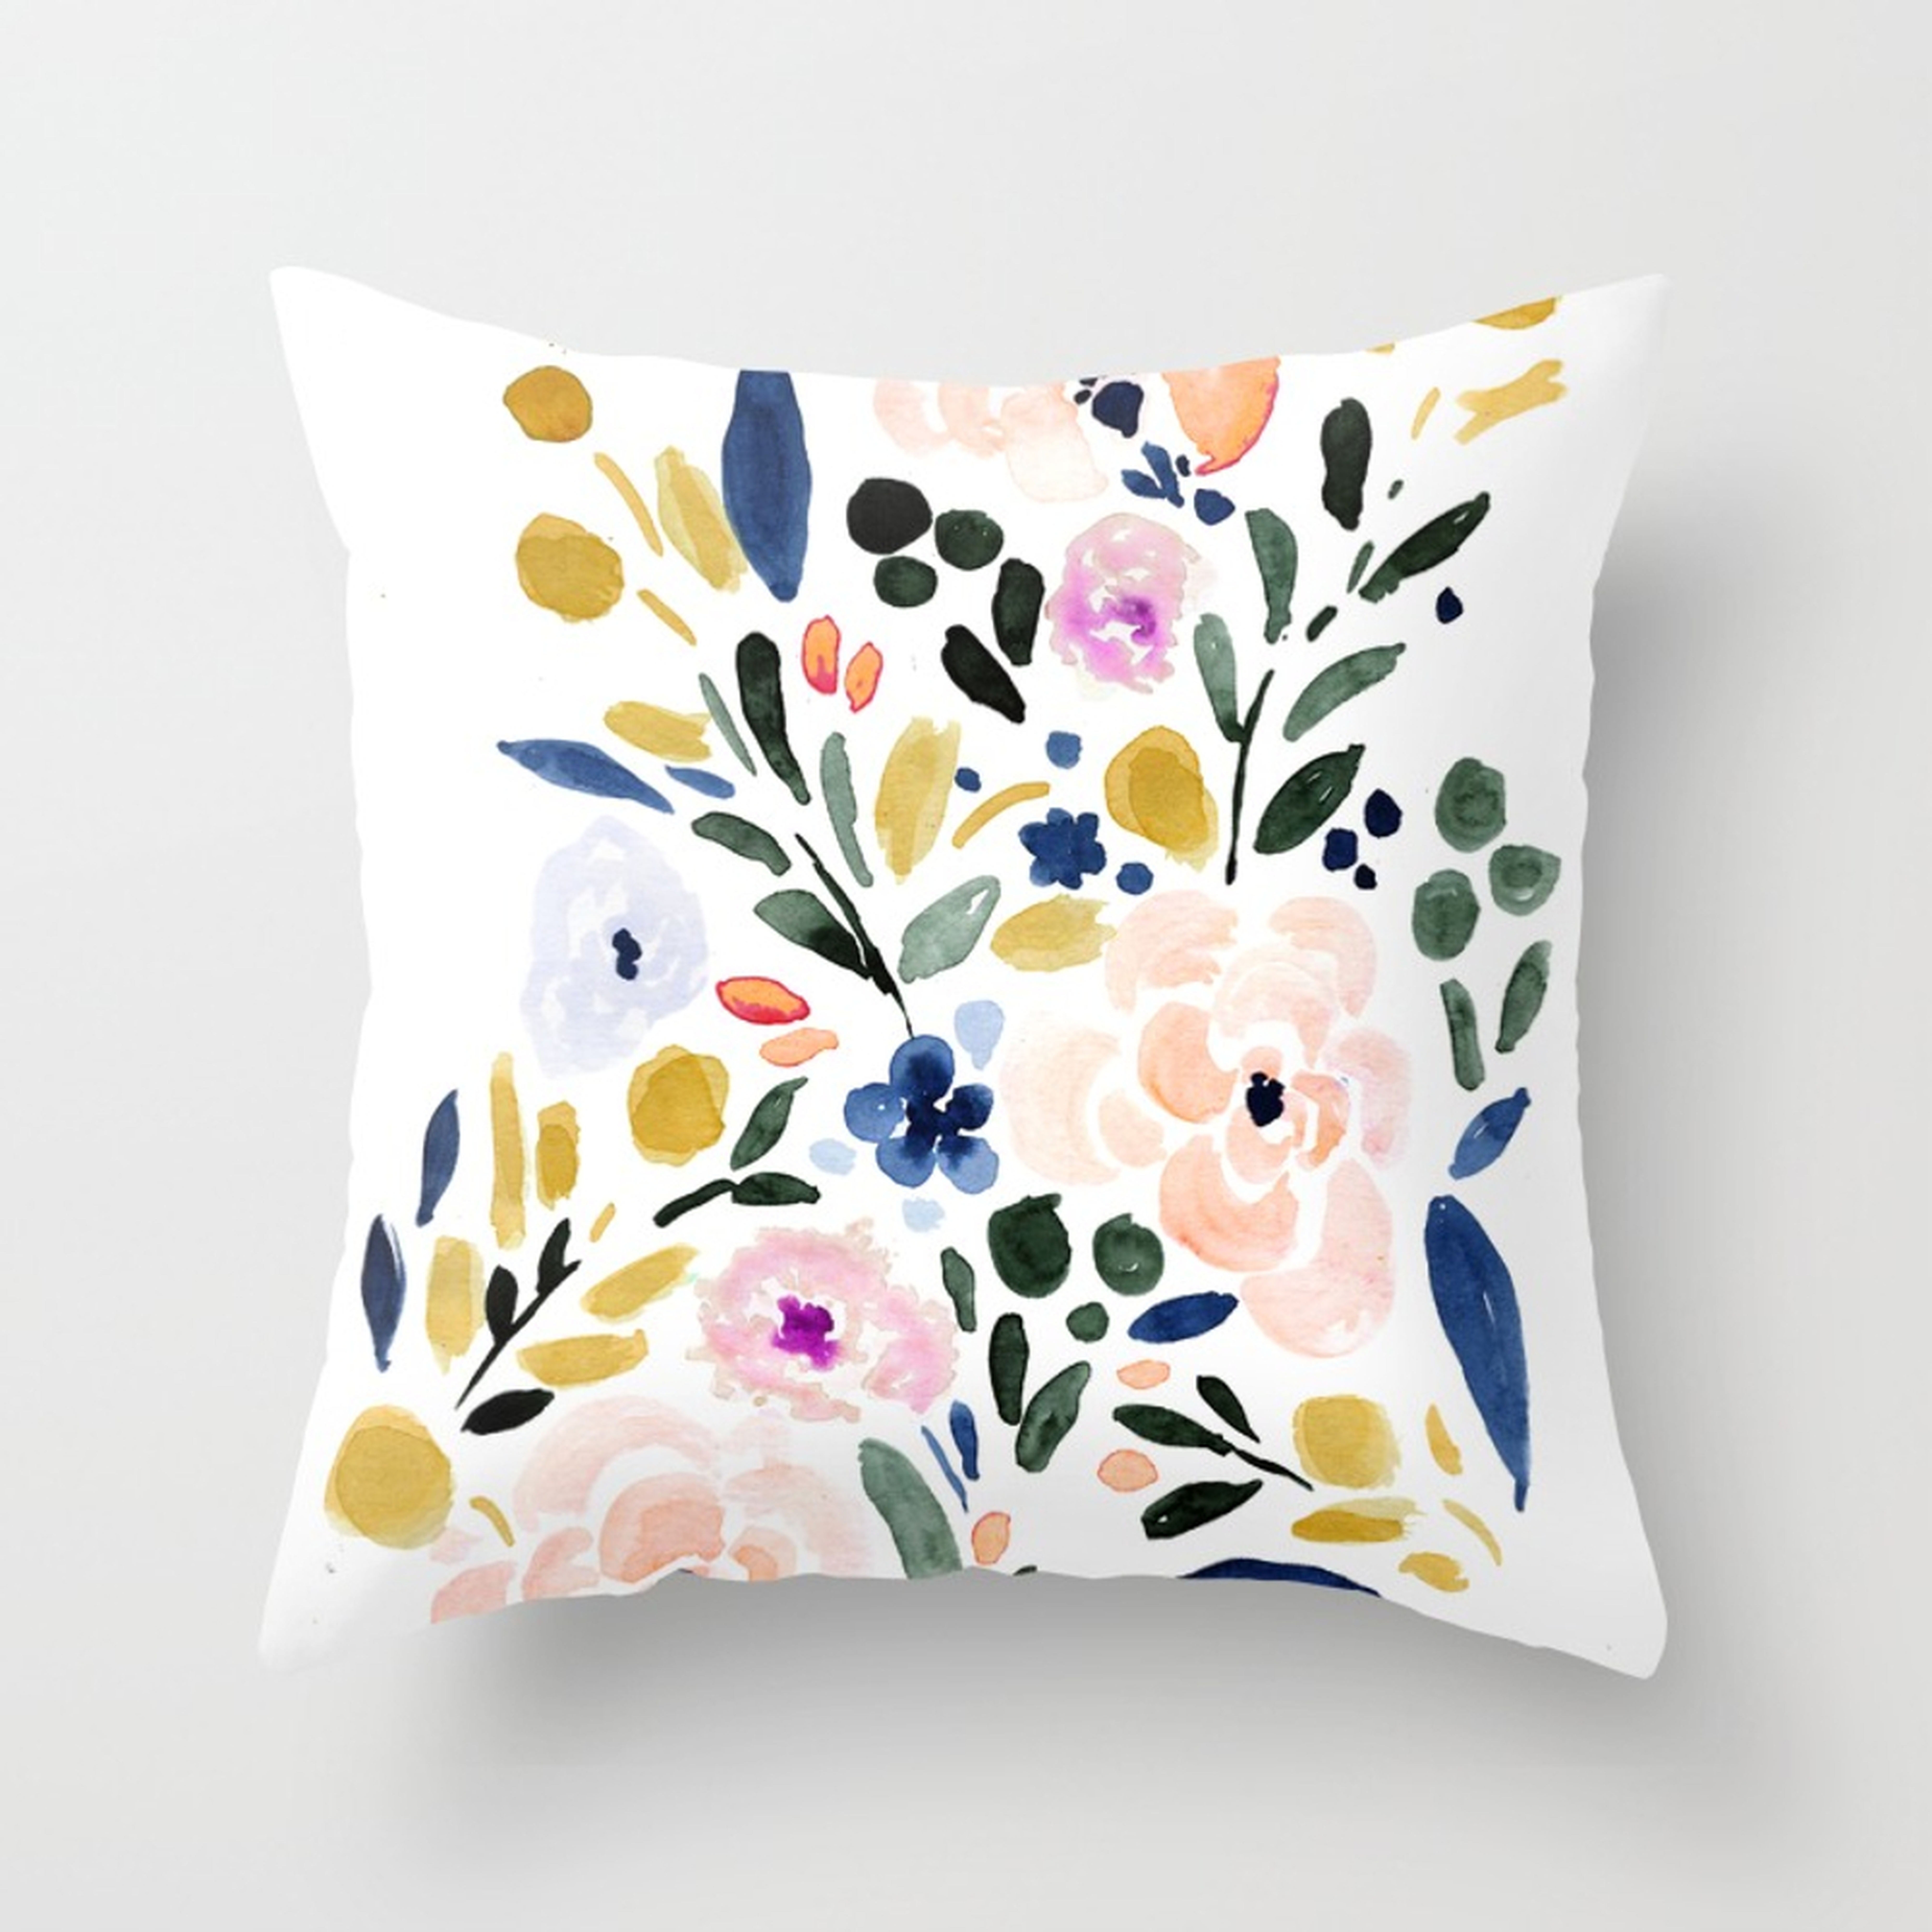 Sierra Floral Throw Pillow by Crystal W Design - Cover (20" x 20") With Pillow Insert - Outdoor Pillow - Society6